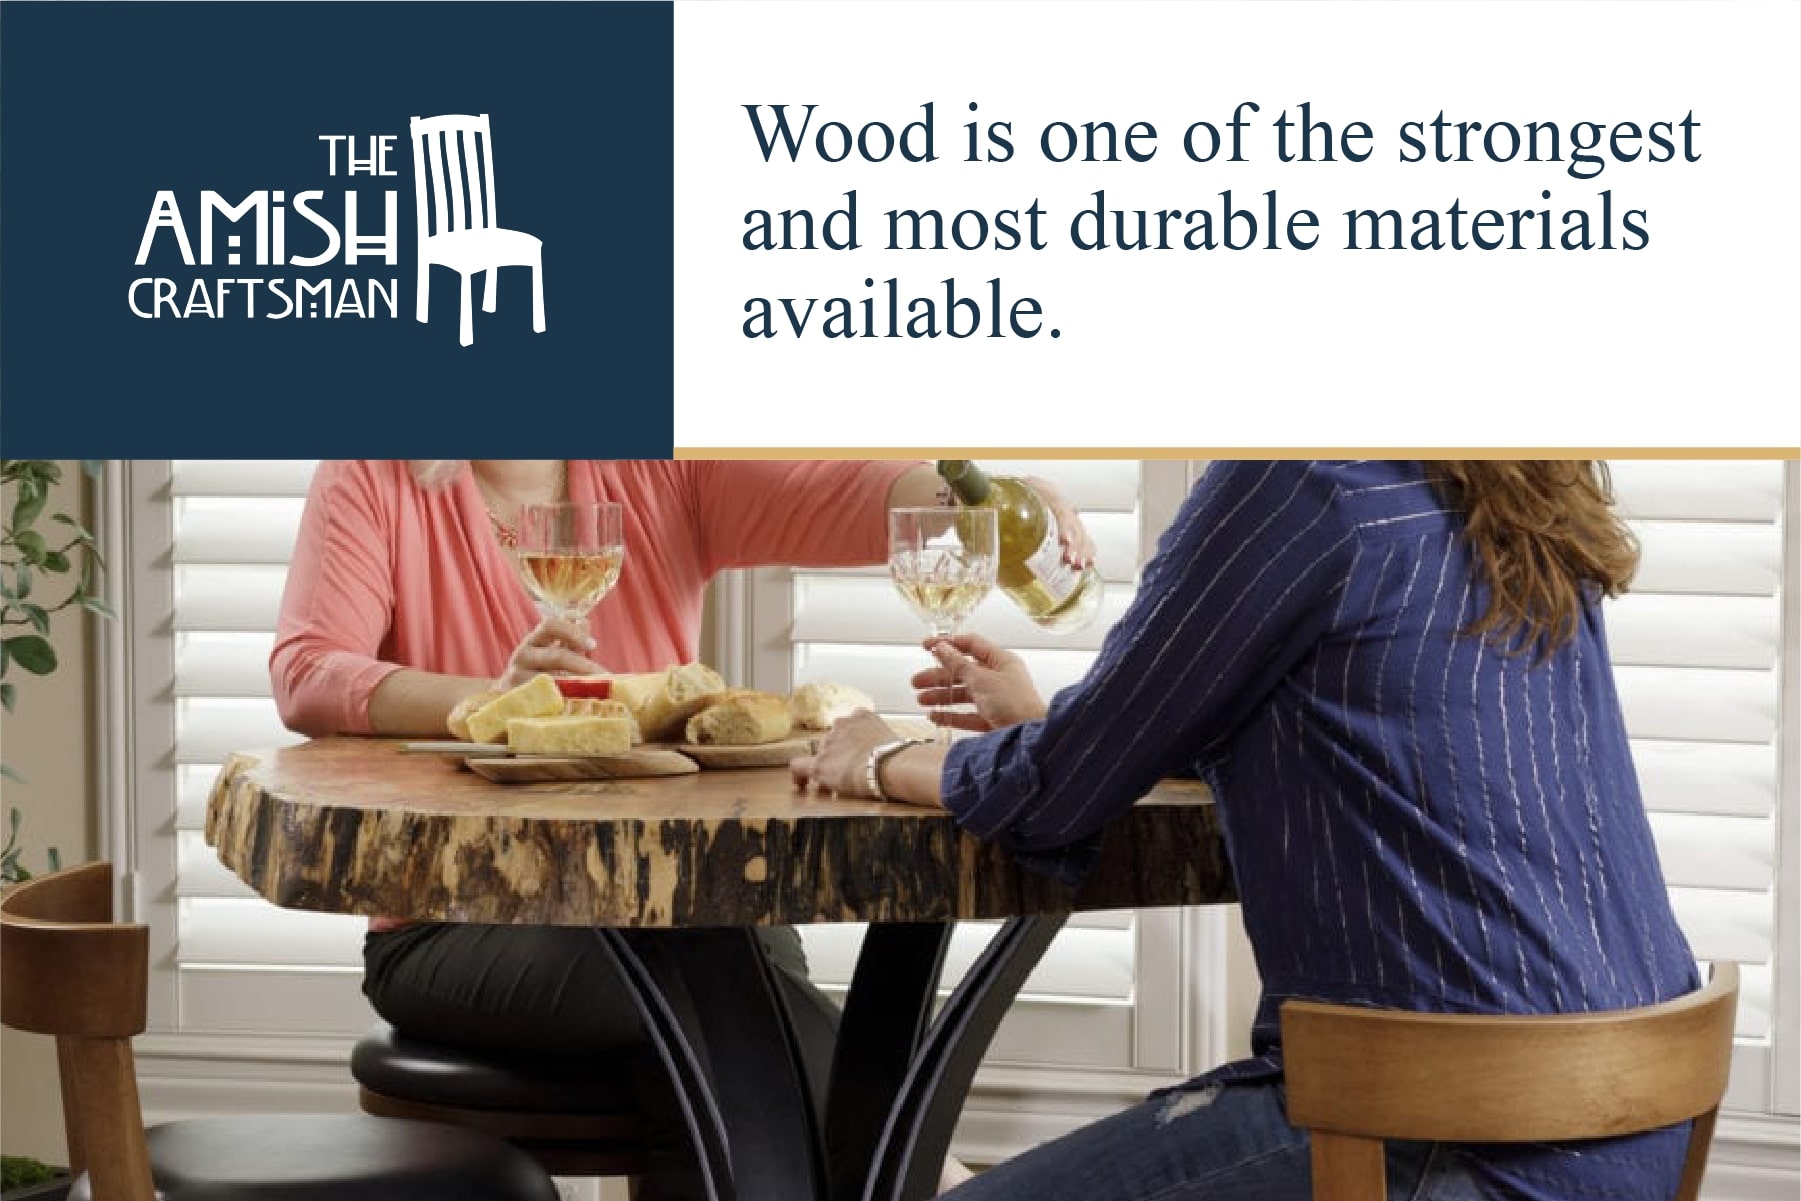 wood is a strong and durable material